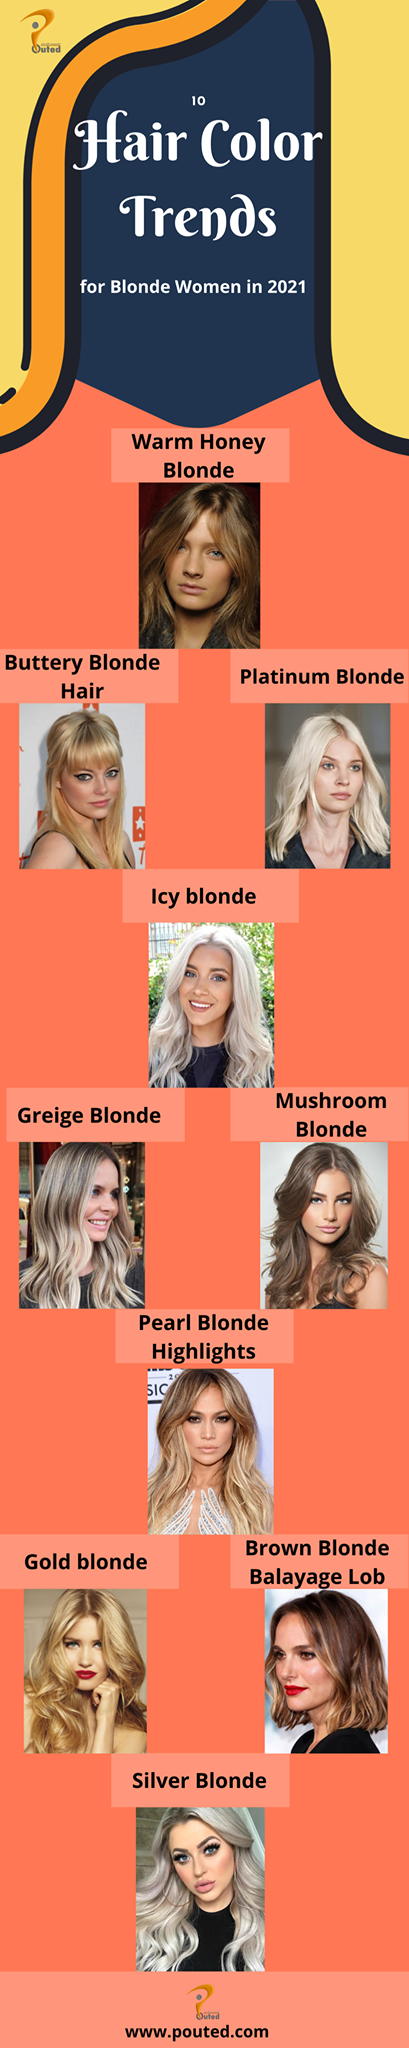 Top 10 Hair Color Trends for Blonde Women in 2021